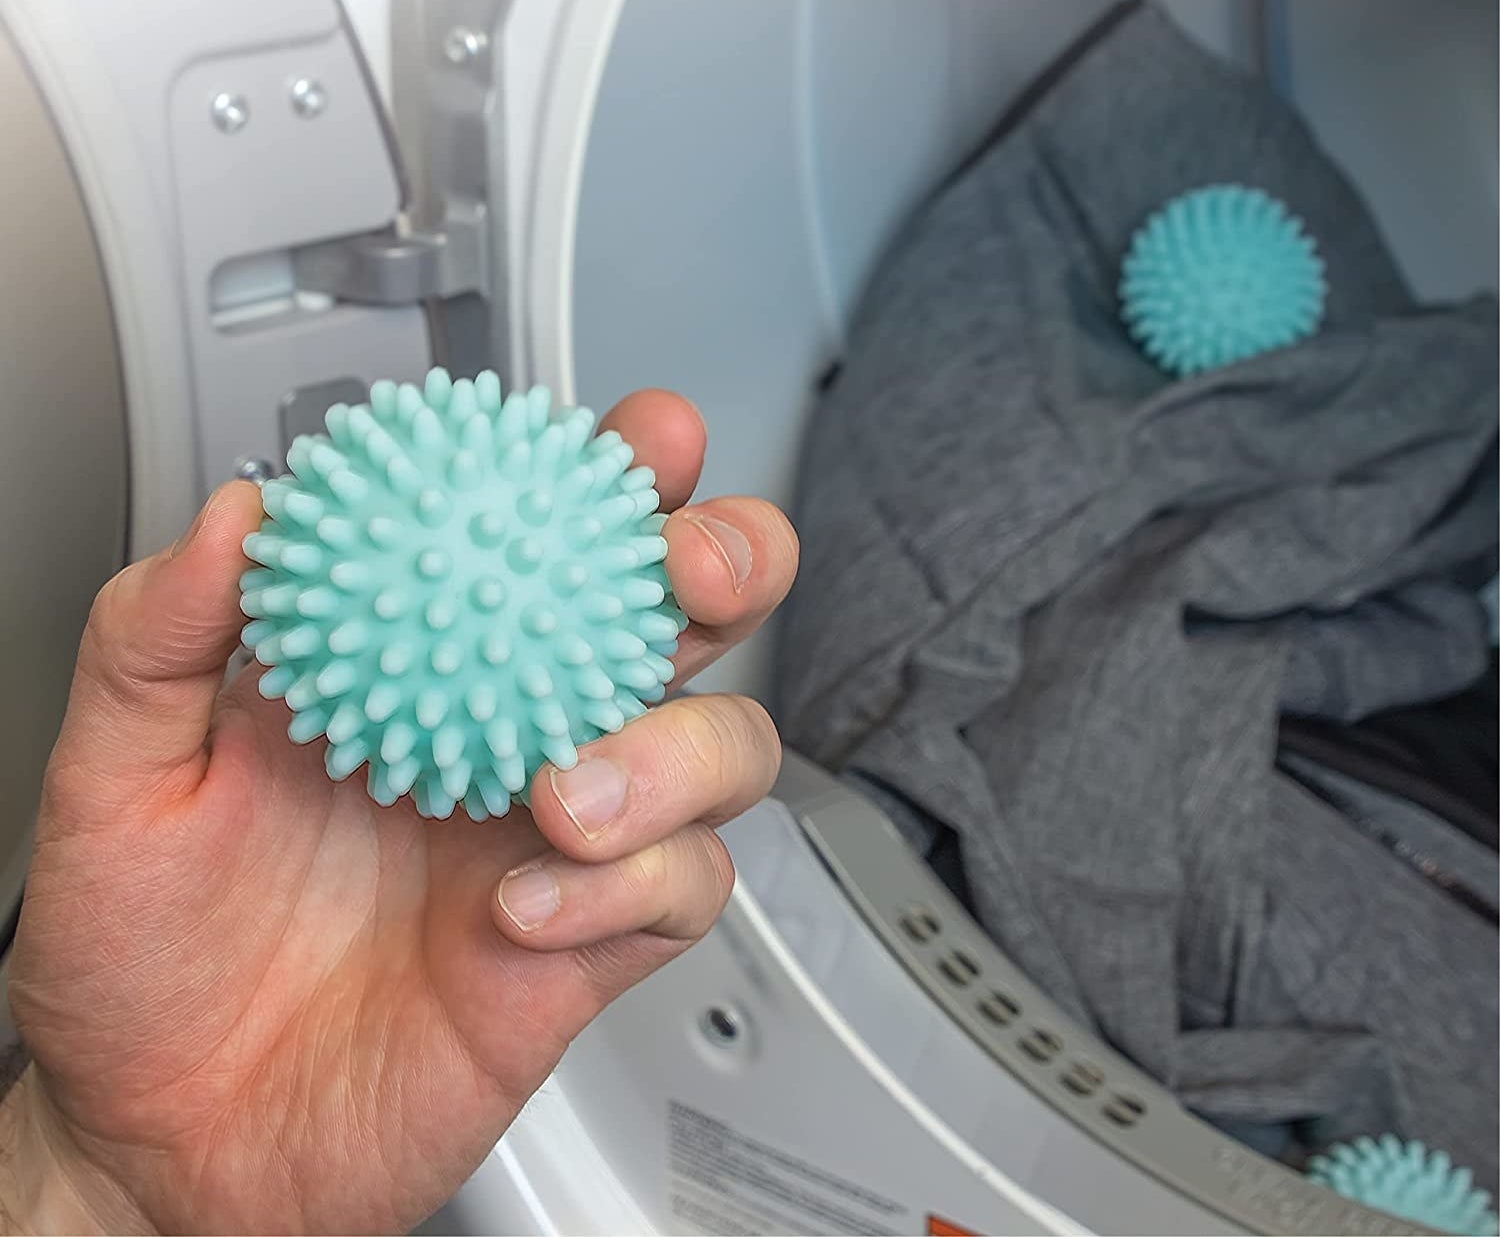 Someone holding up one of the spiky dryer balls; an open dryer is visible in the background